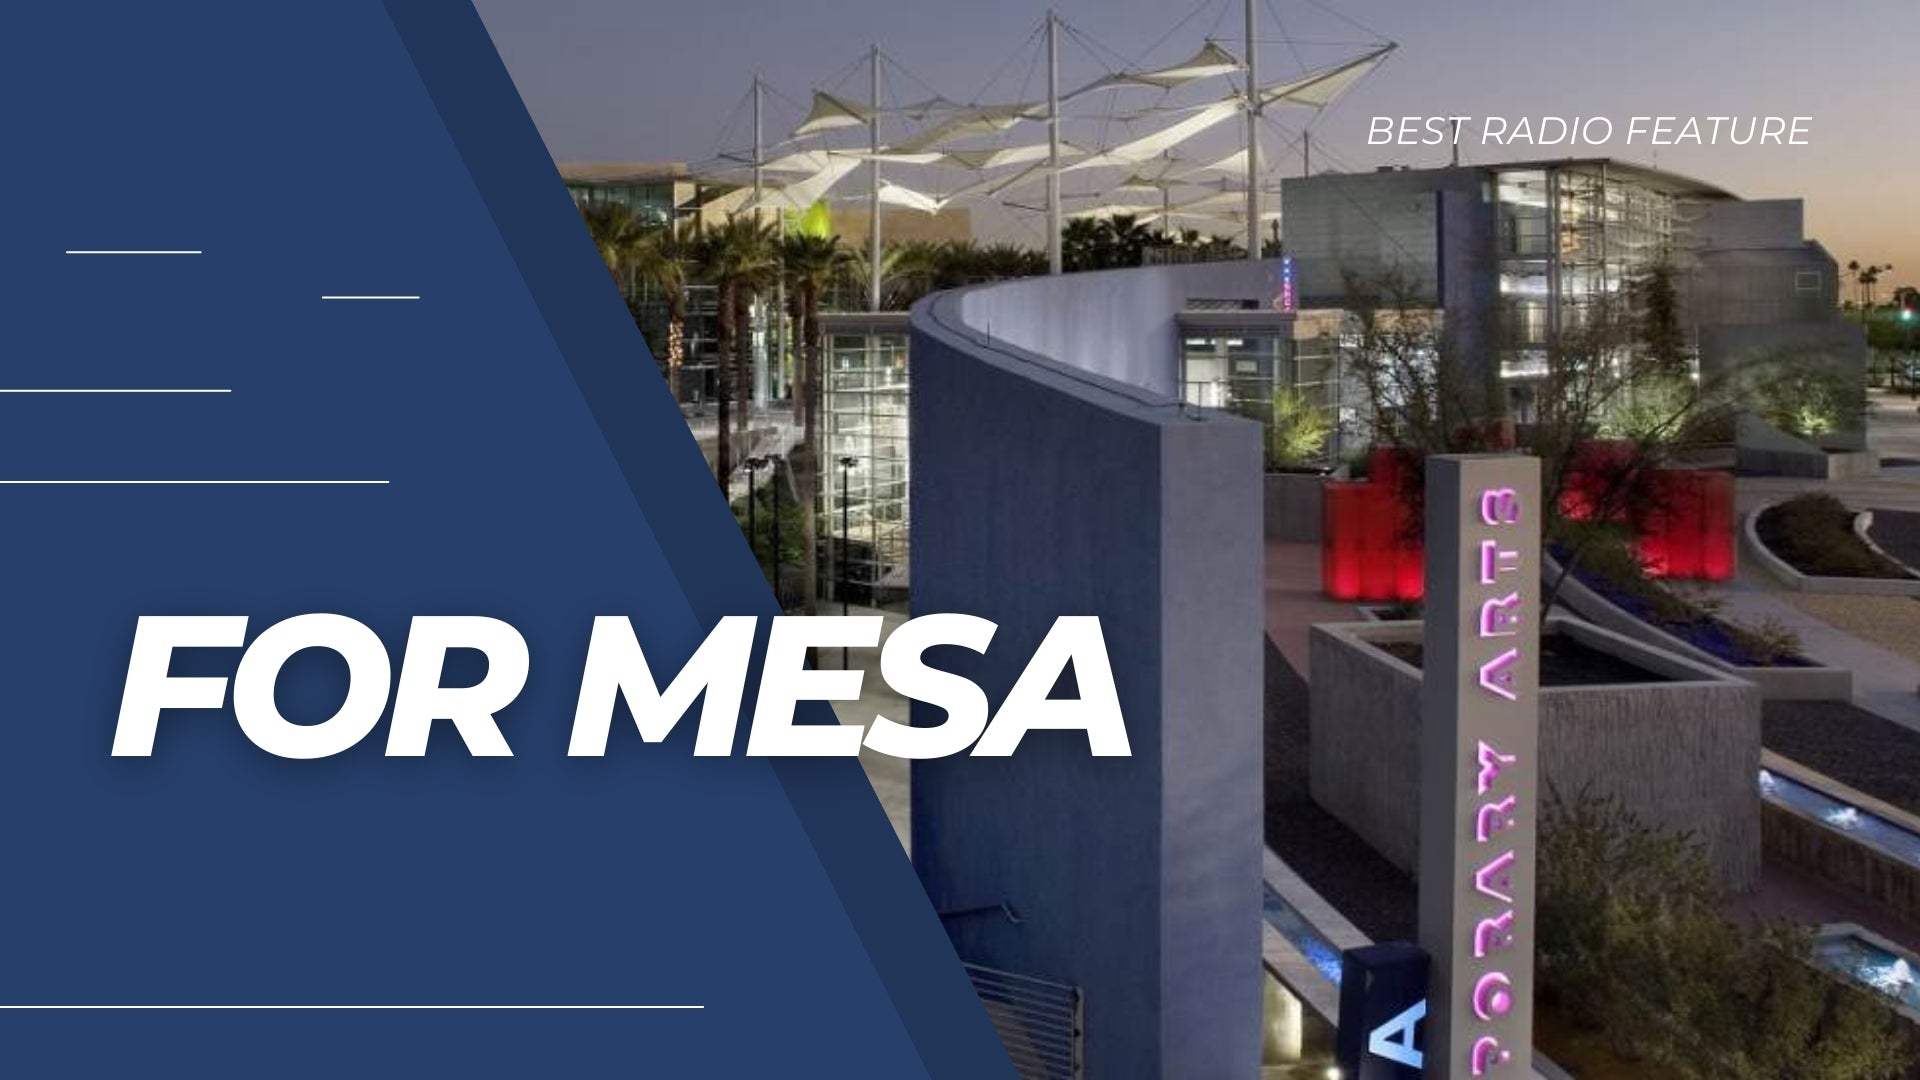 What's The Best Radio Feature For Mesa